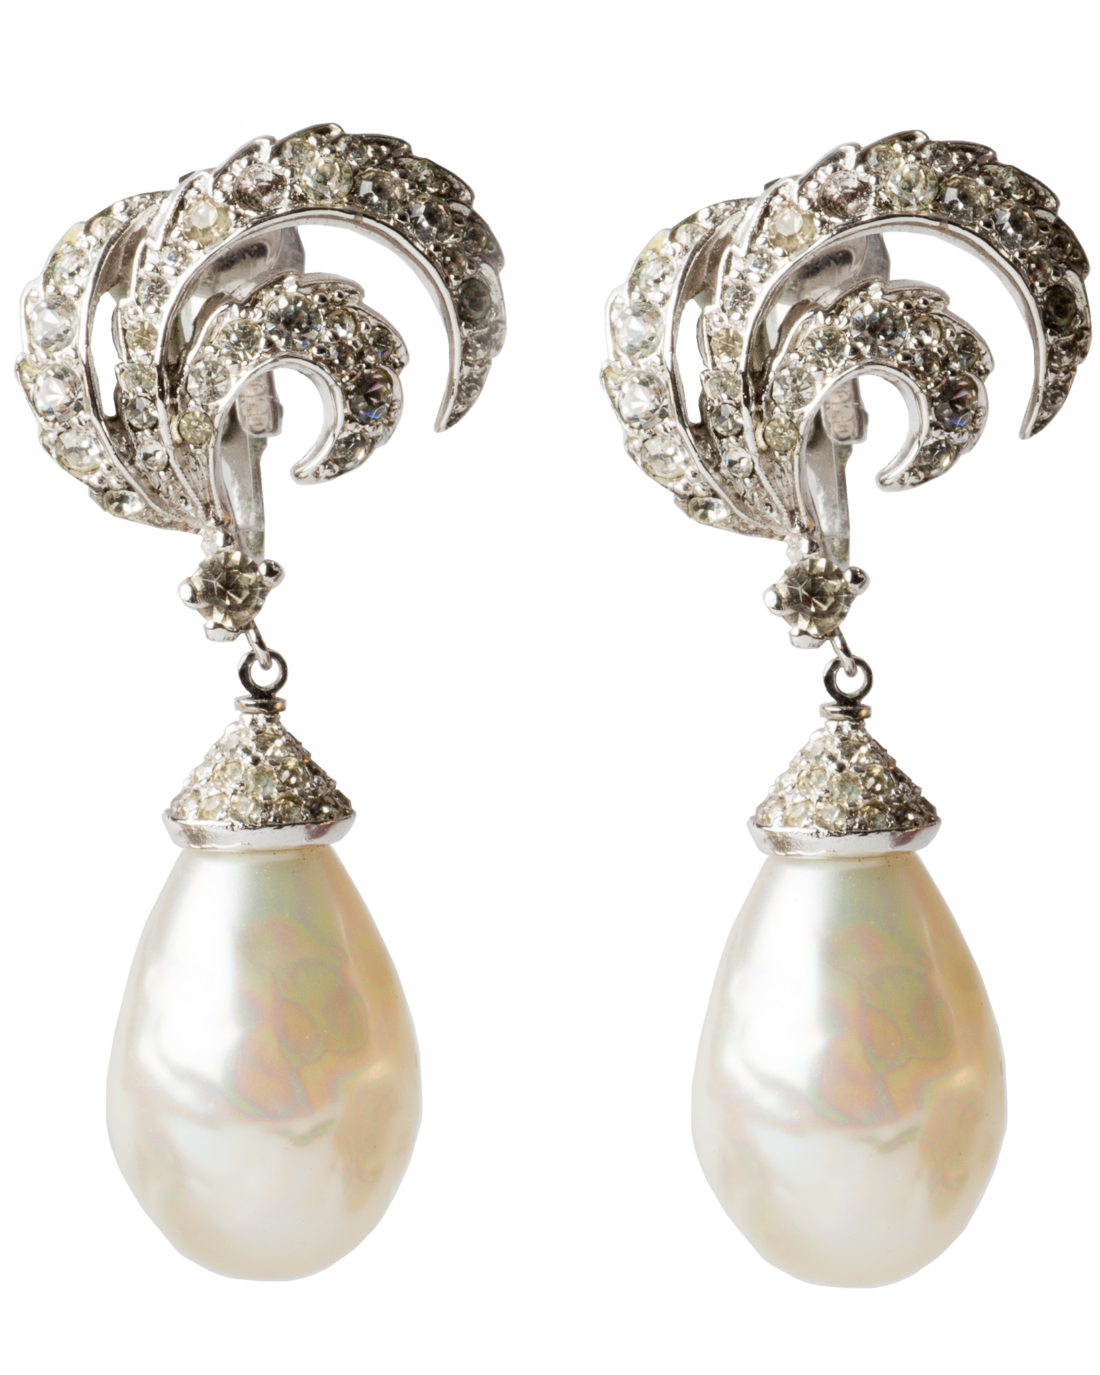 Vintage Silver Crystal Swag and Japanese Baroque Pearl Drop Earrings, circa 1950’s